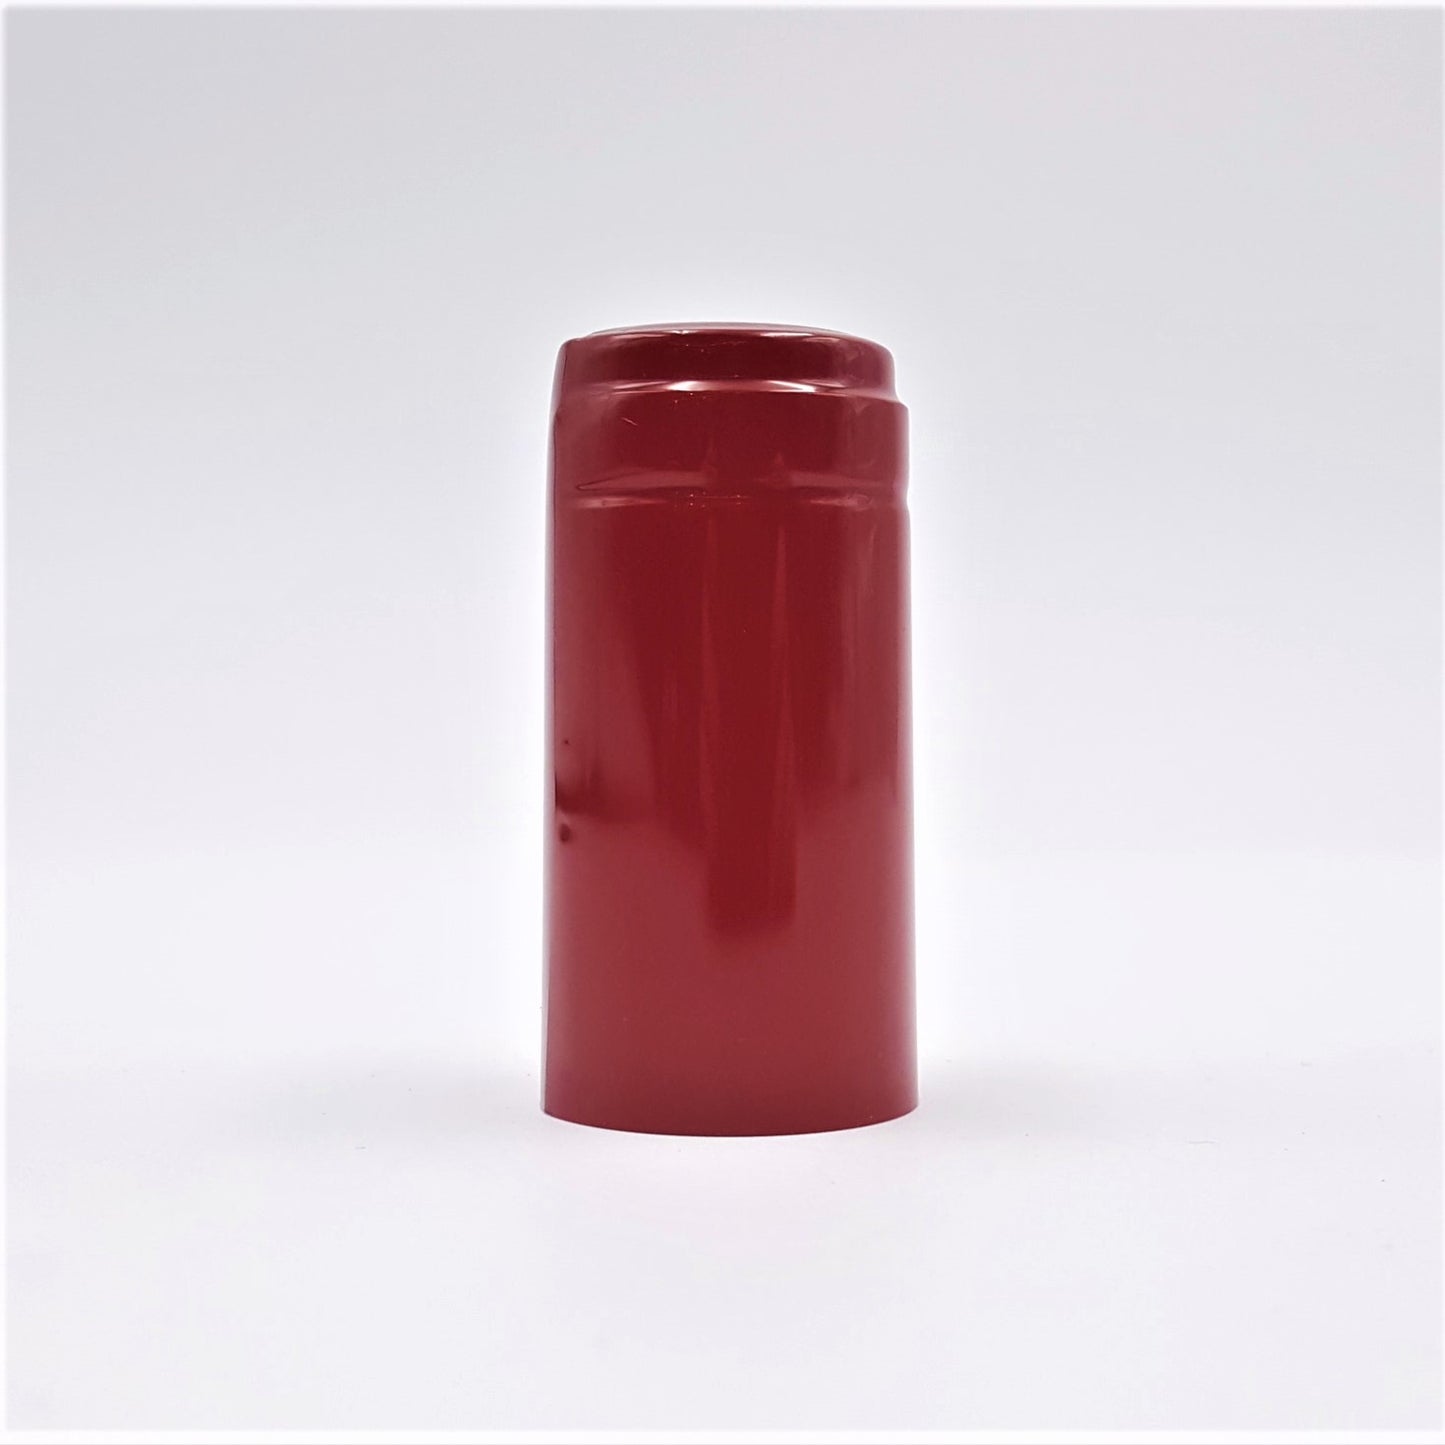 packet of 25 rich red gloss heat shrink capsules for wine bottles.